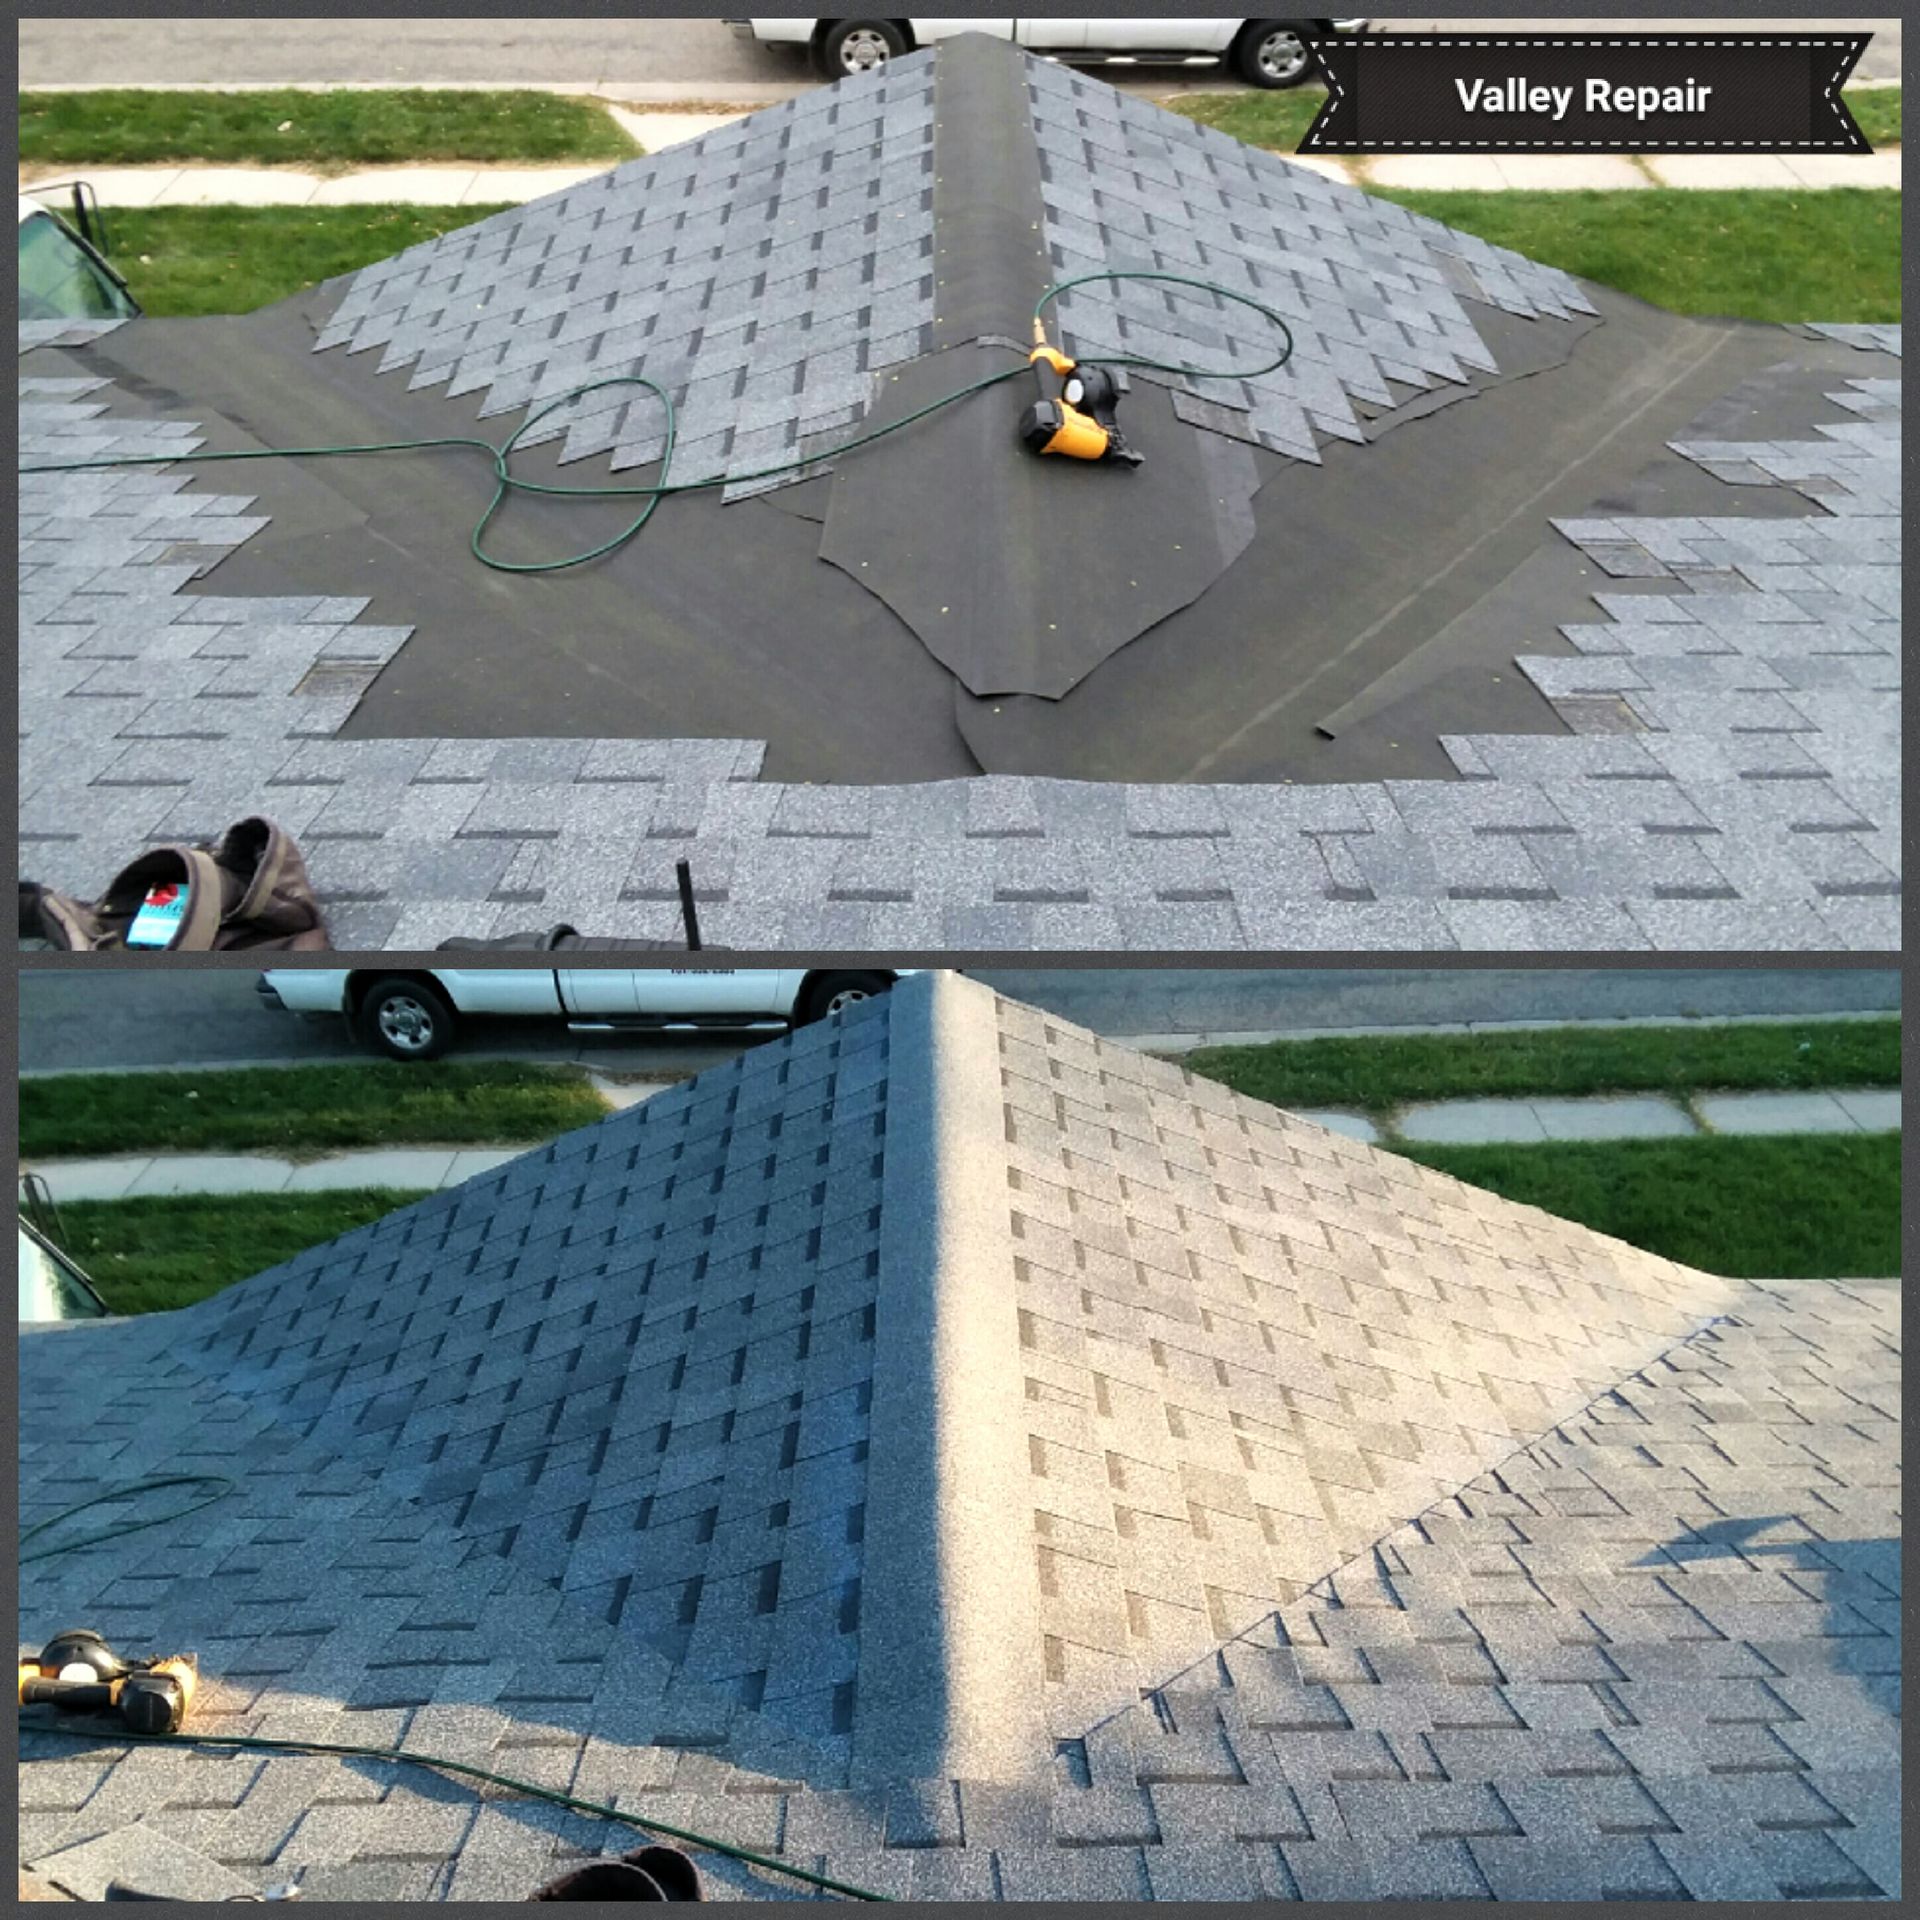 Shingle Roof Valley being repaired with new leak guard barrier Underlayment in West Fargo-North Dakota